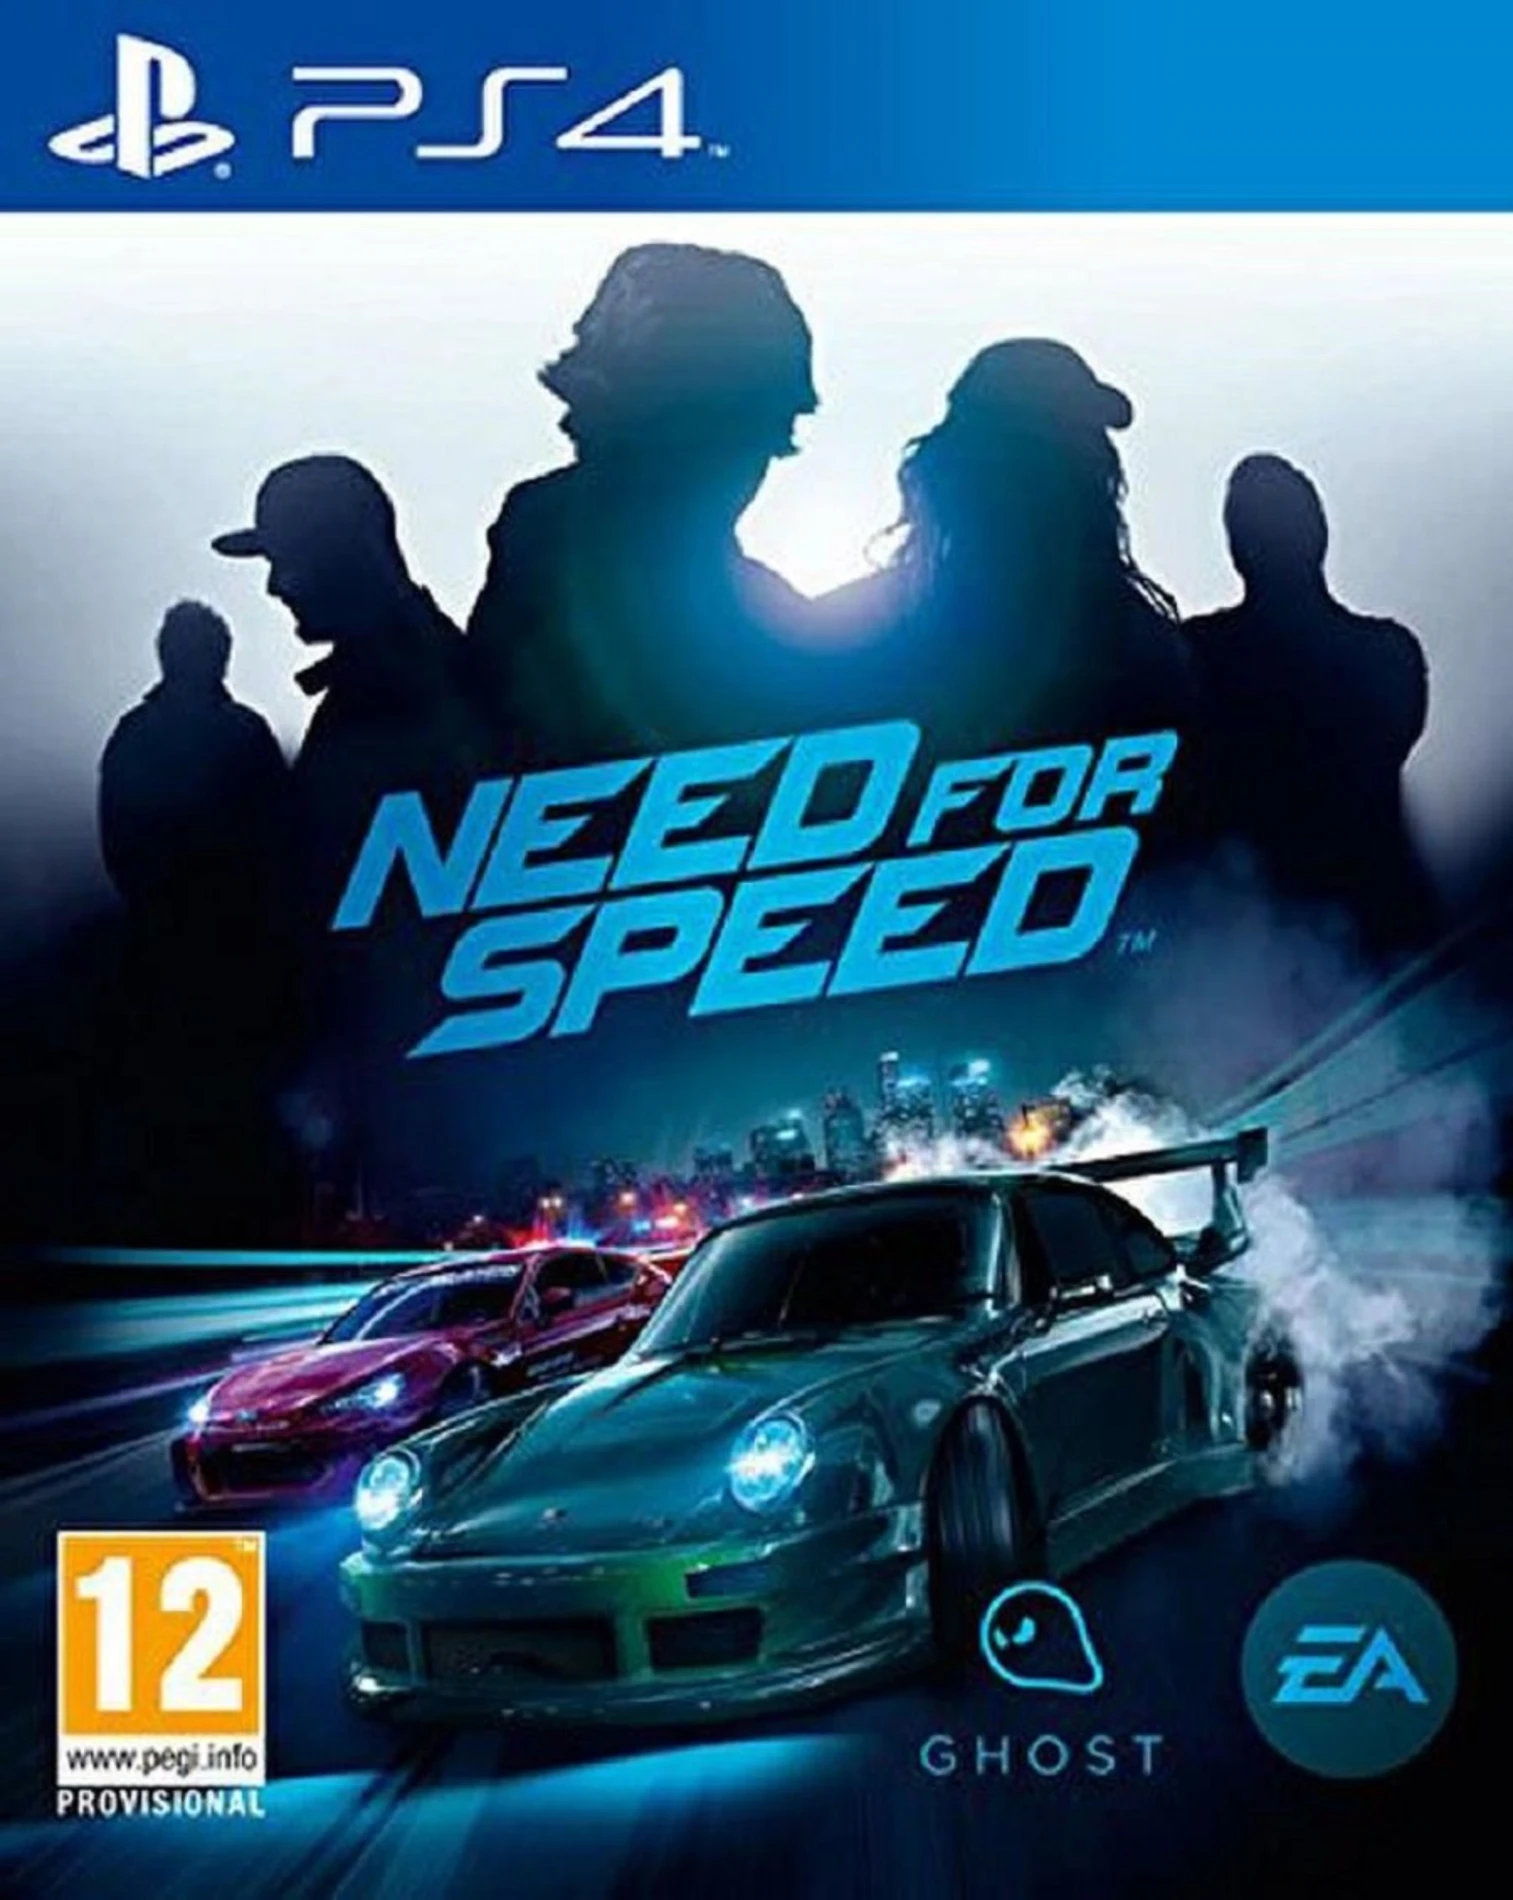 [2.EL] Need For Speed 2015 - Ps4 Oyun